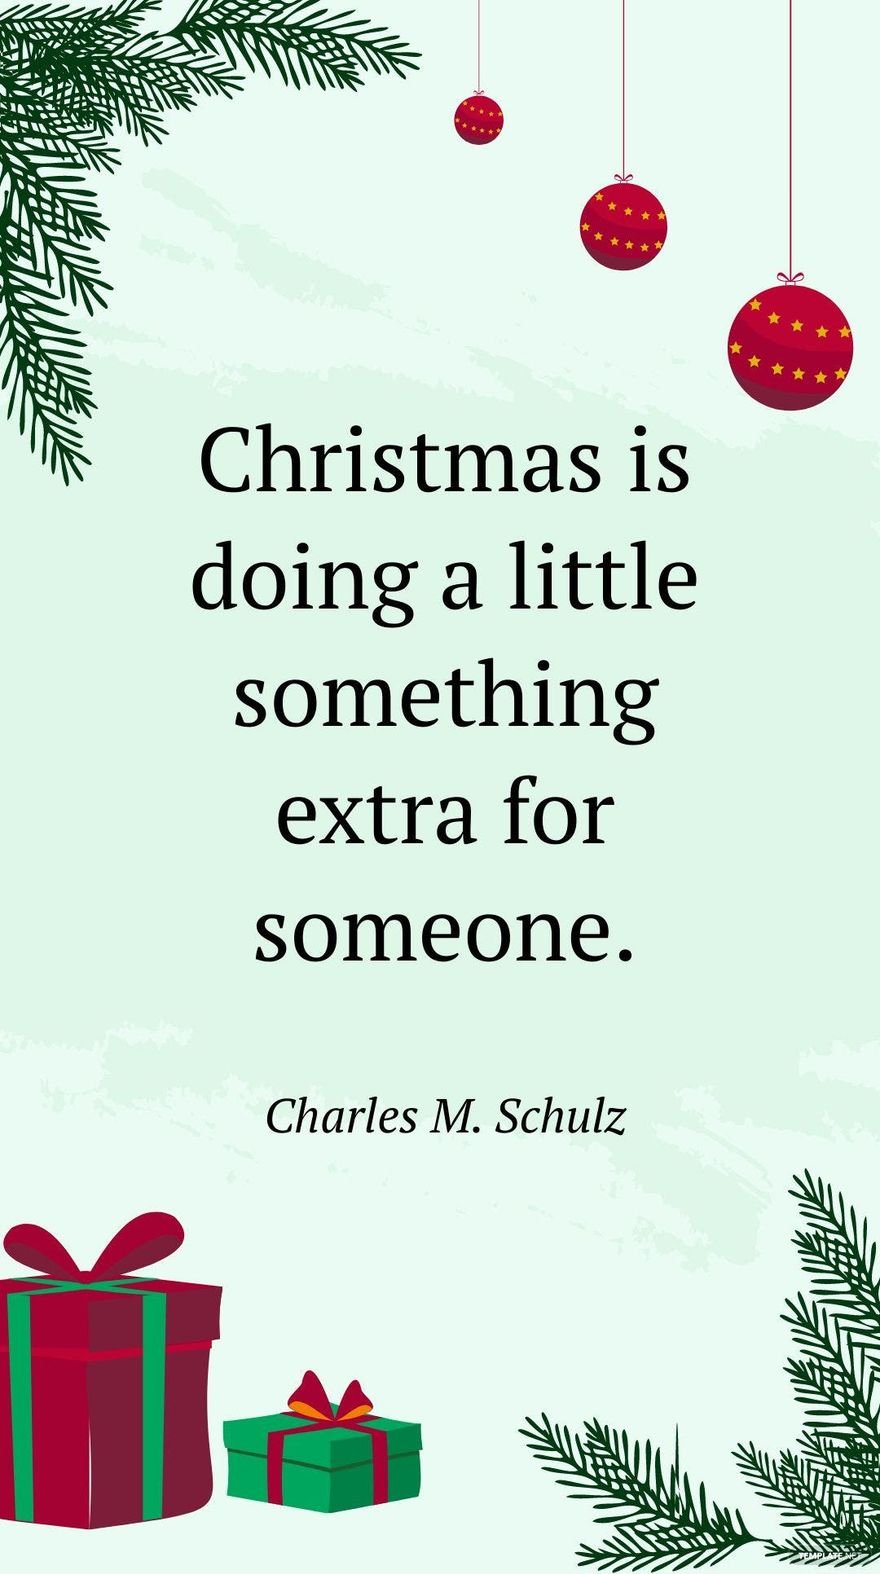 Charles M. Schulz - Christmas is doing a little something extra for someone. 